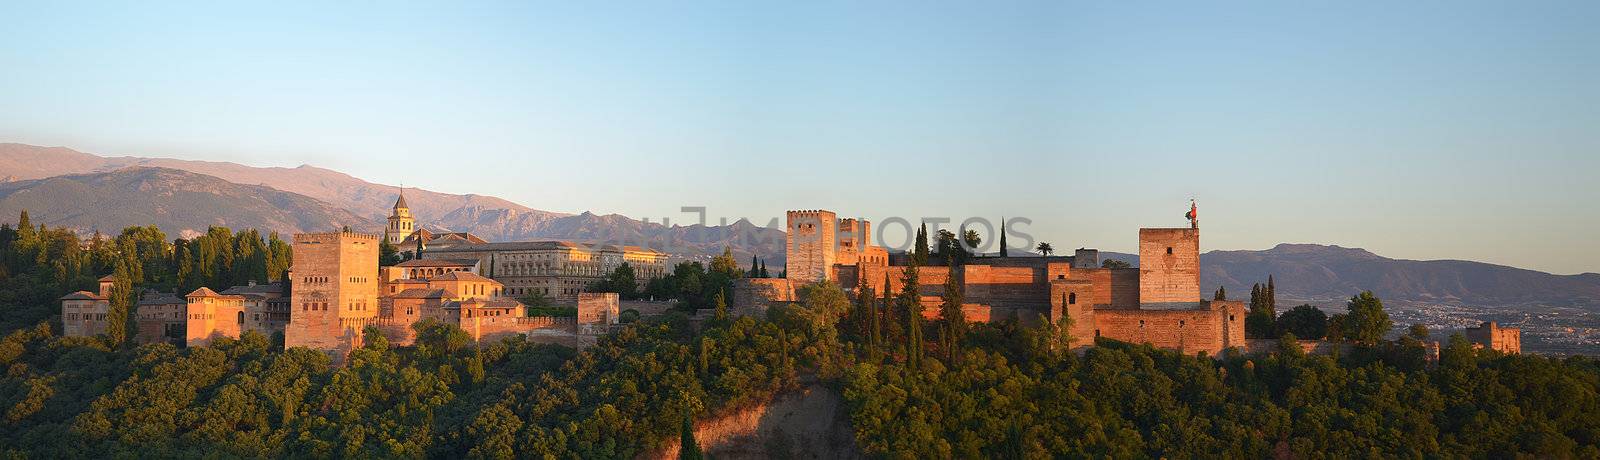 View of the Alhambra complex in Granada, Spain, at dusk